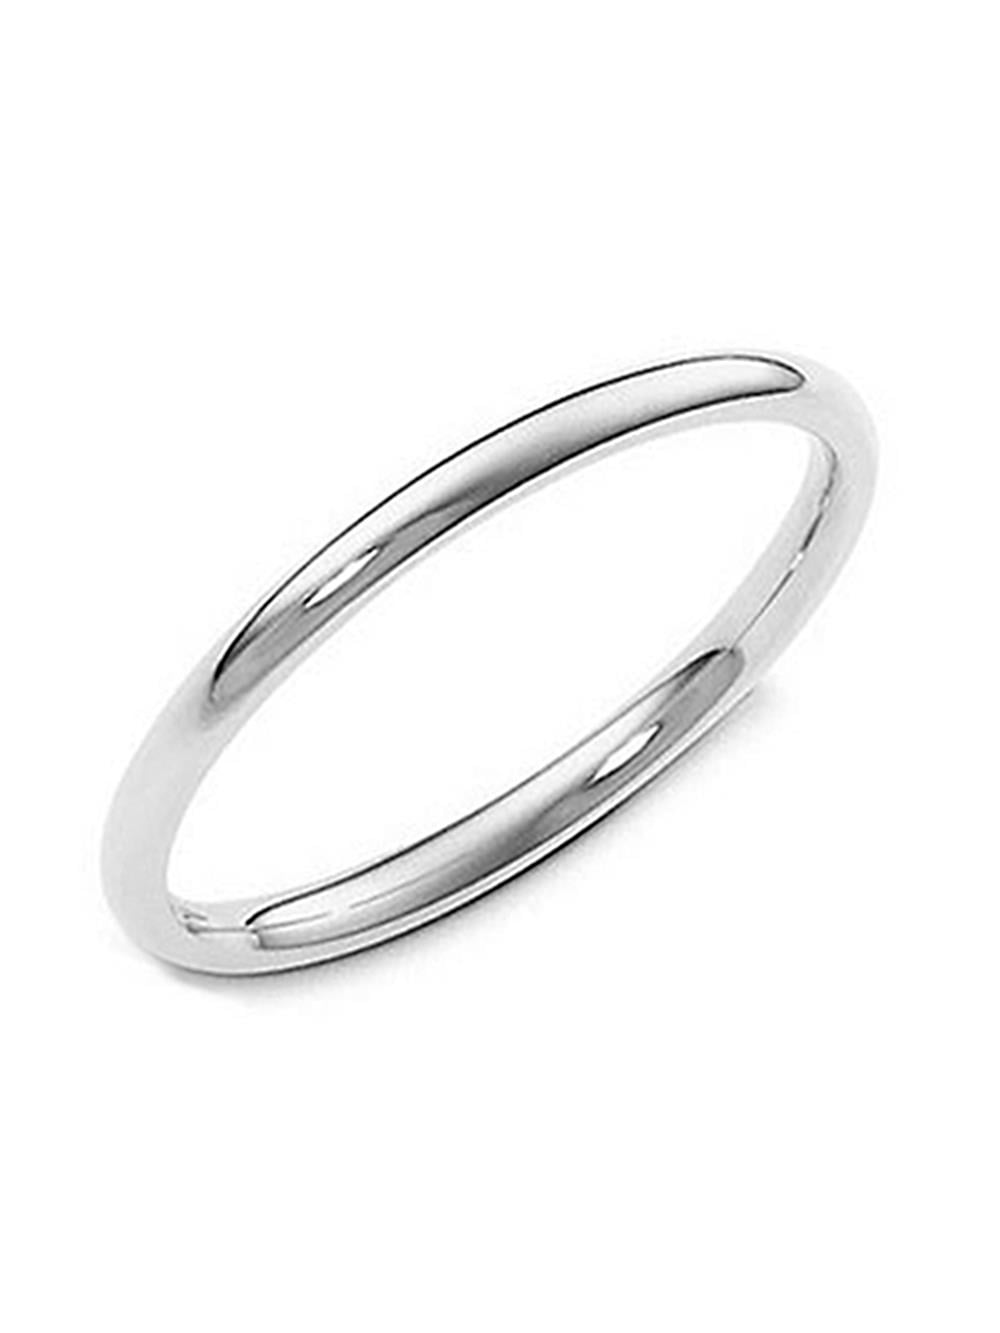 Exceptionally fine domed simplistic sterling silver band